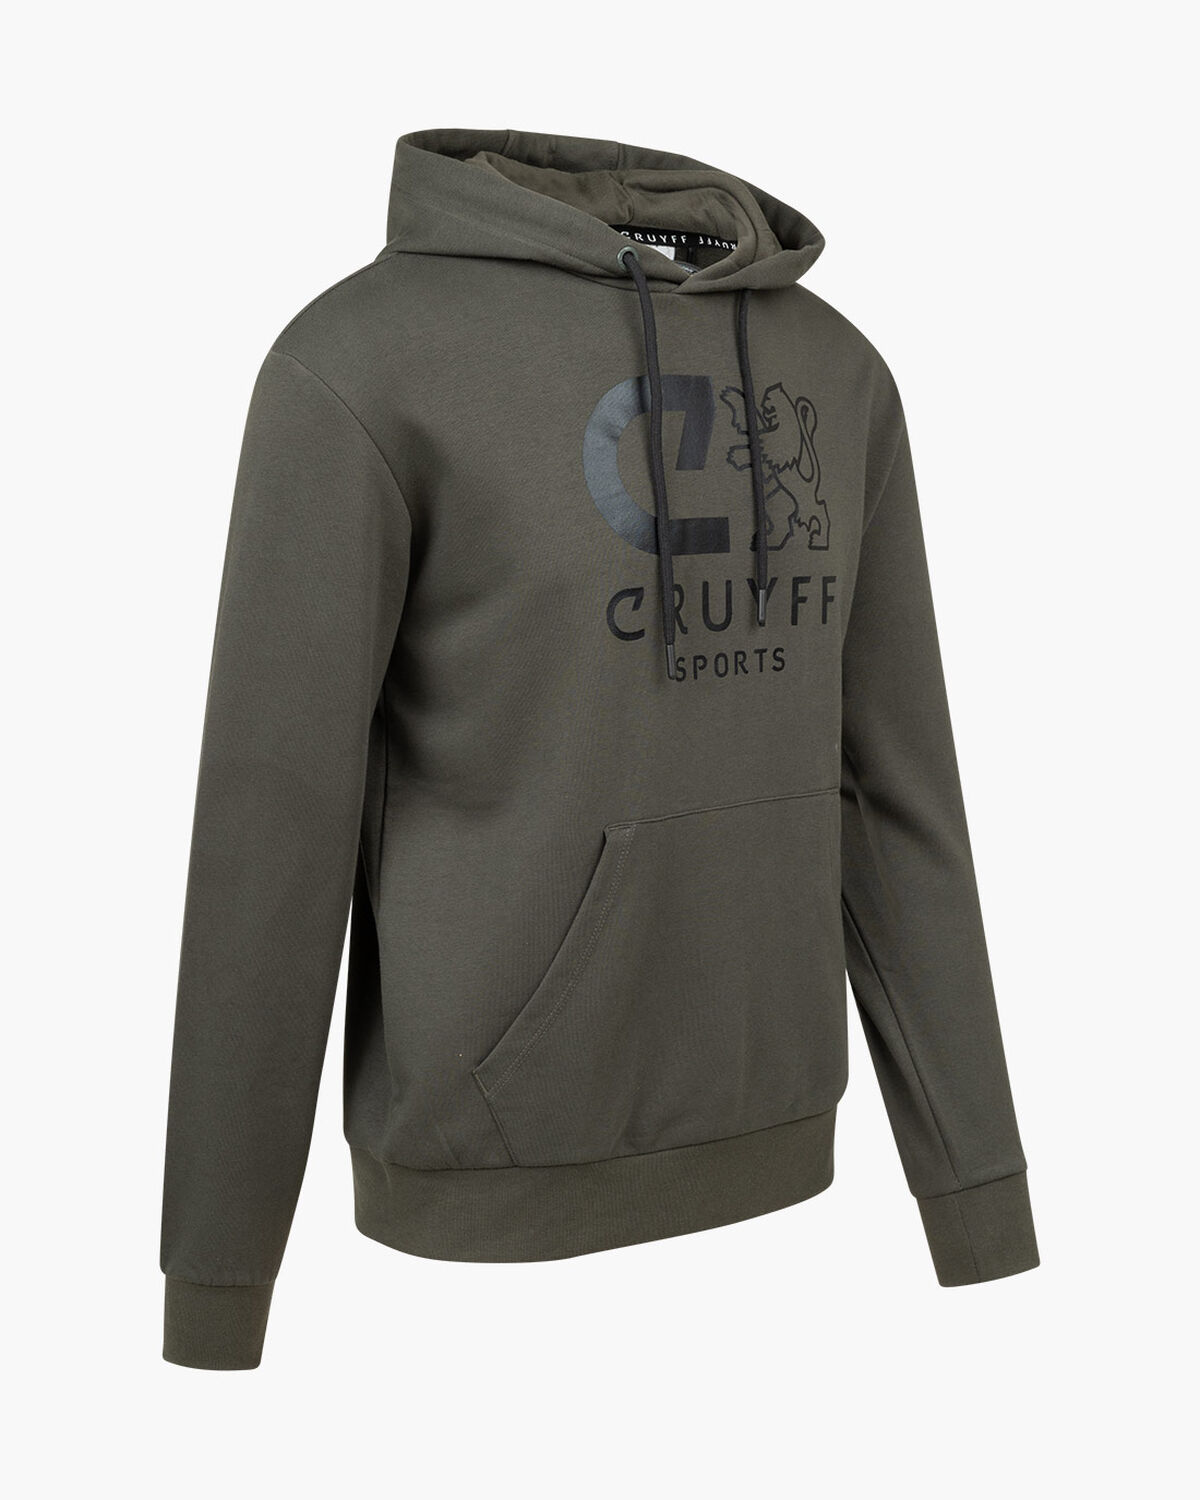 Do Hoodie - 80% Cotton / 20% Polyester, Army green, hi-res